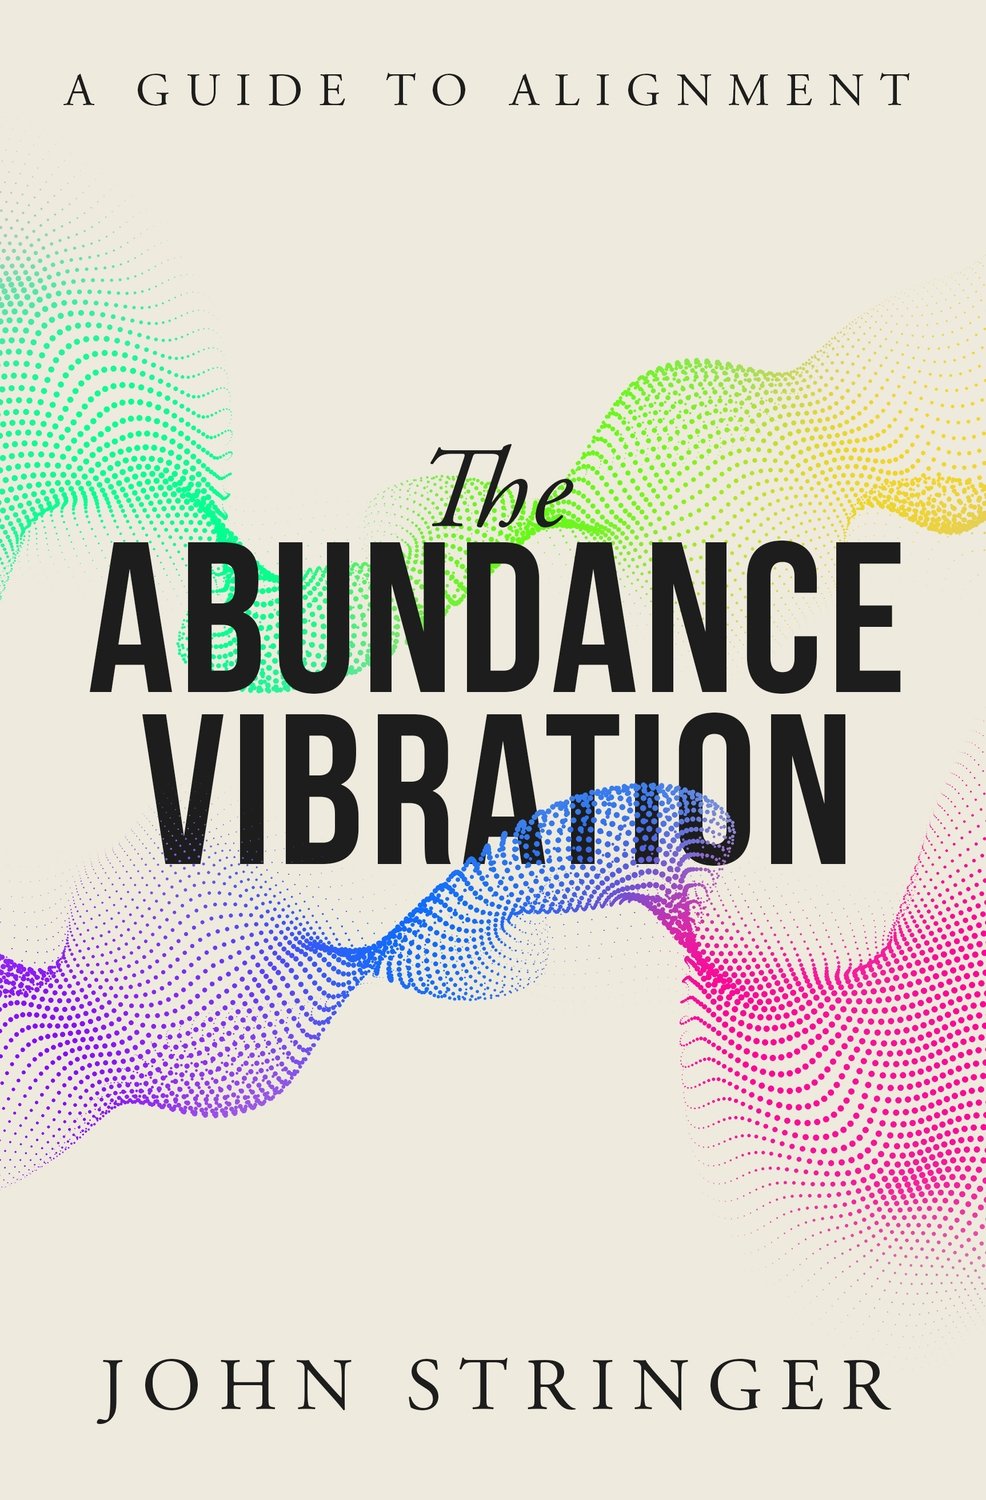 The Abundance Vibration: A Guide to Alignment (digital book)